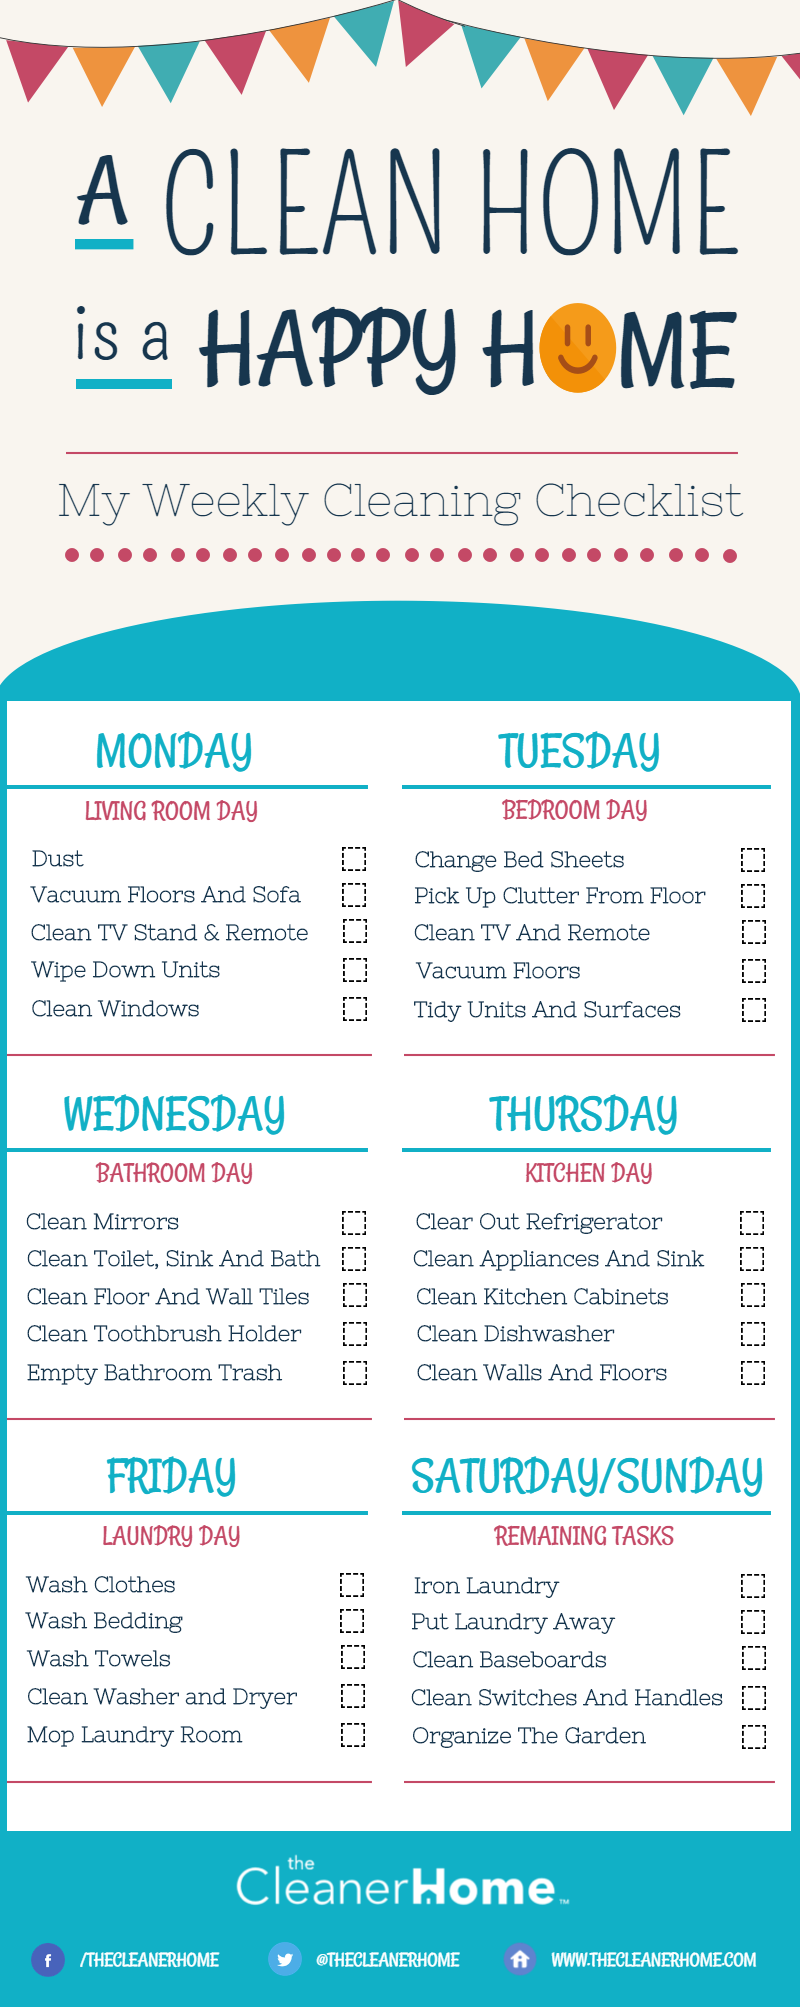 FREE Printable Weekly House Cleaning Checklist The 